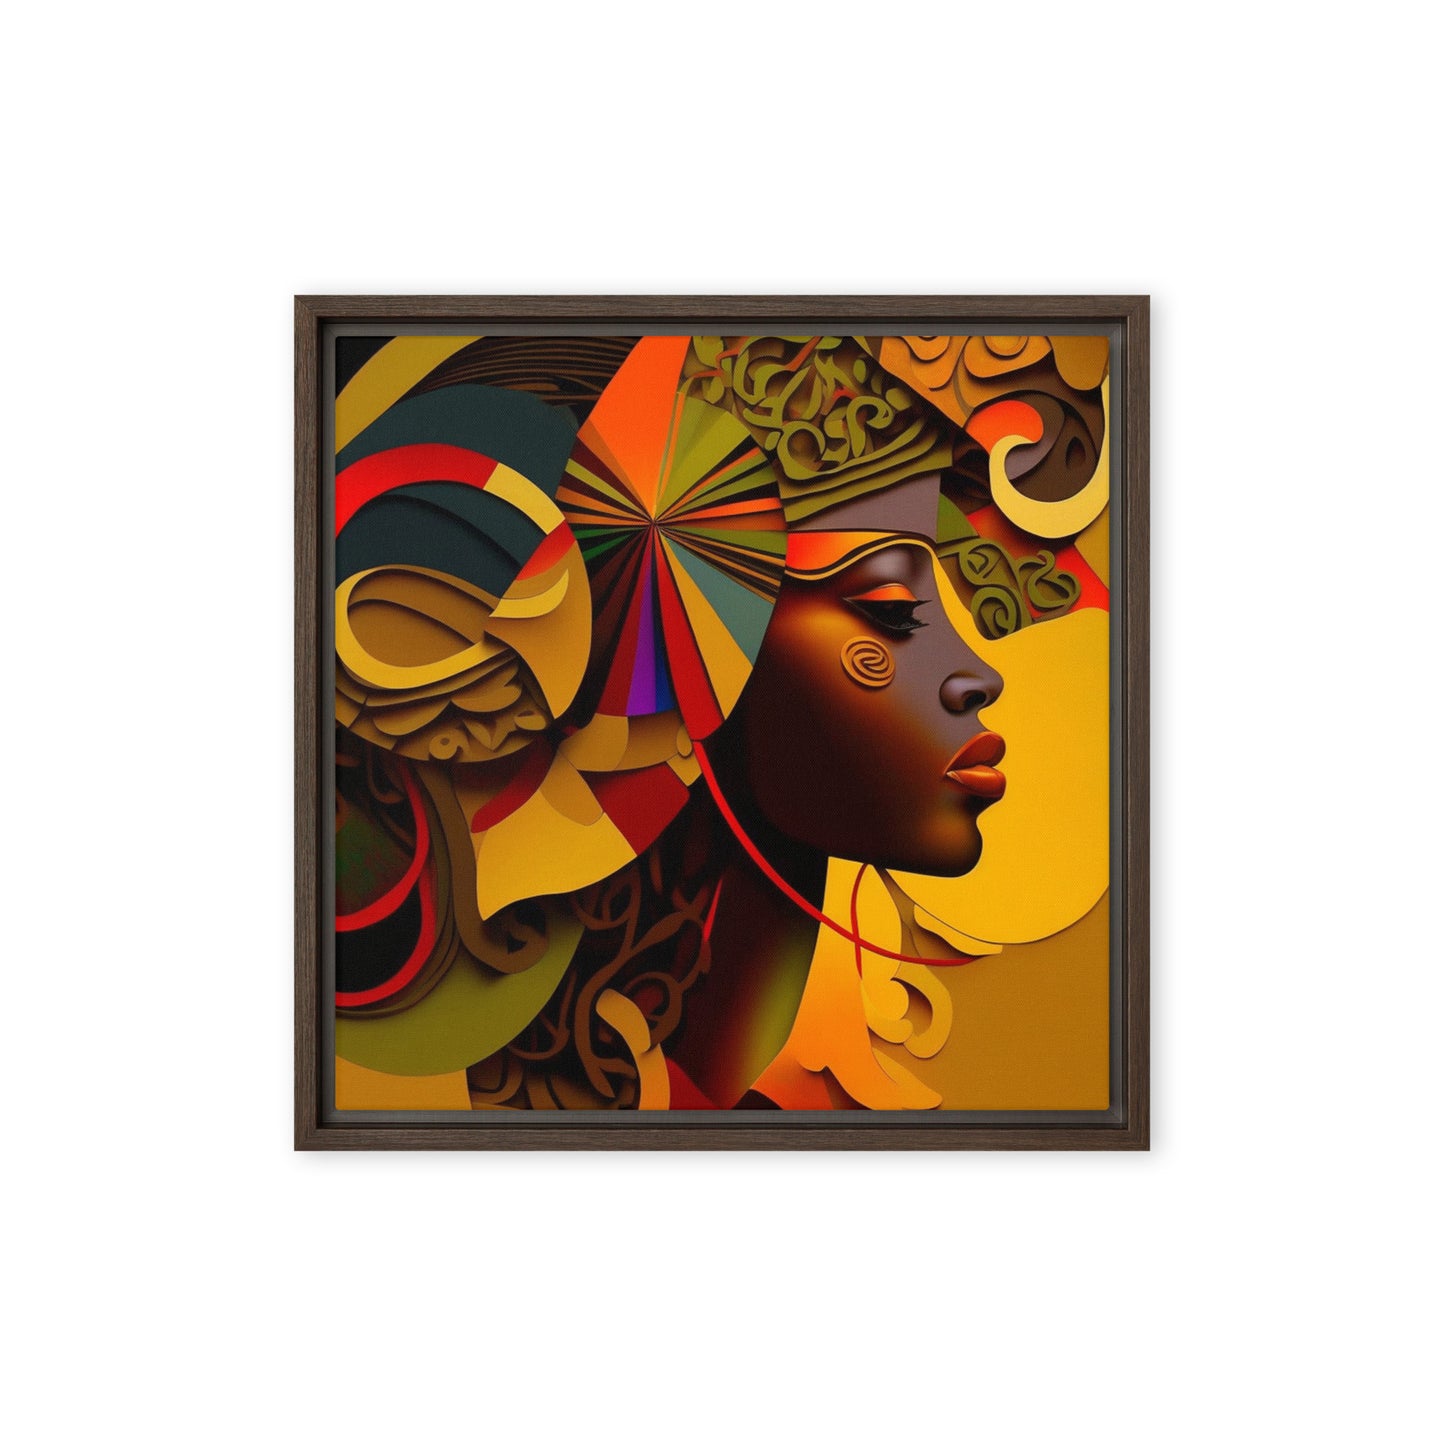 'IMPRESSION': abstract African design: Framed canvas art